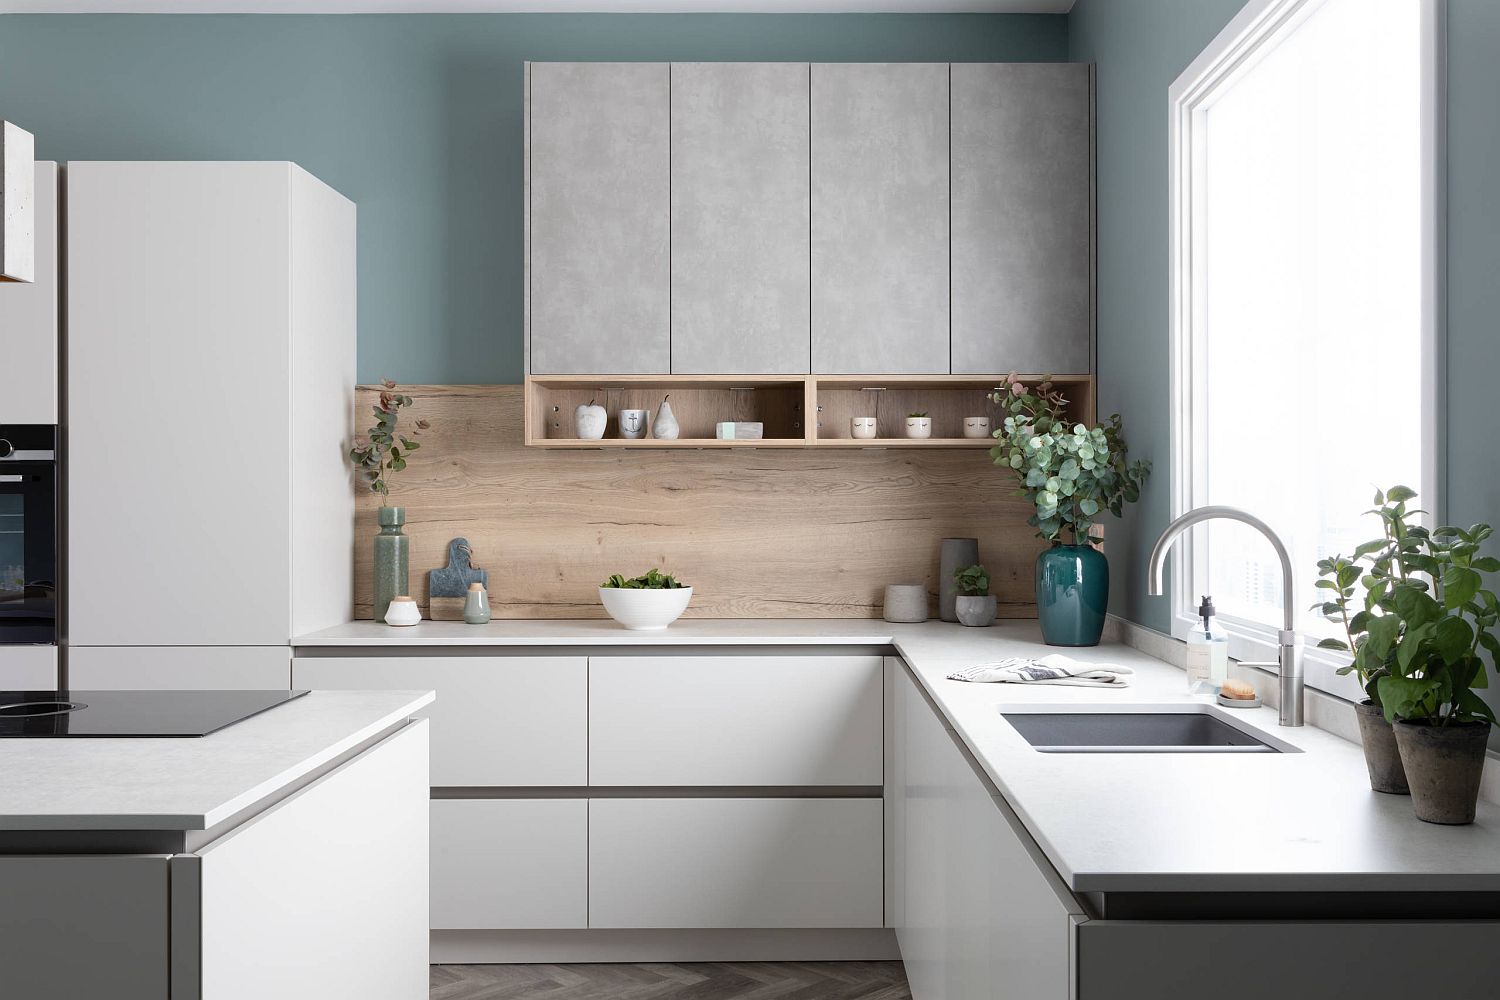 White-kitchen-with-a-touch-of-blue-and-gray-usher-in-Scandinavian-minimalism